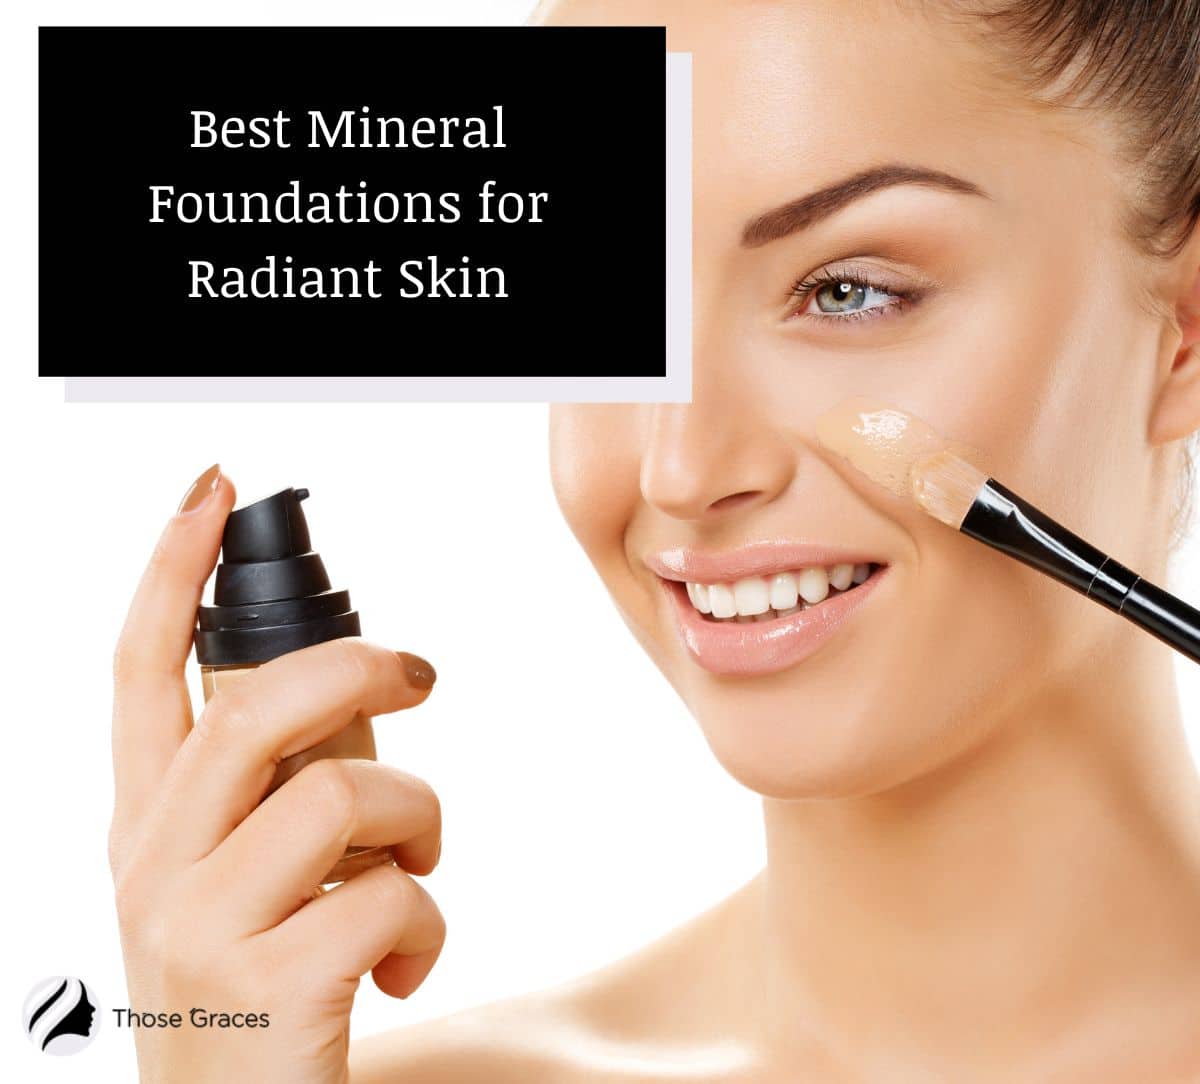 lady using one of the Best Mineral Foundations for Radiant Skin